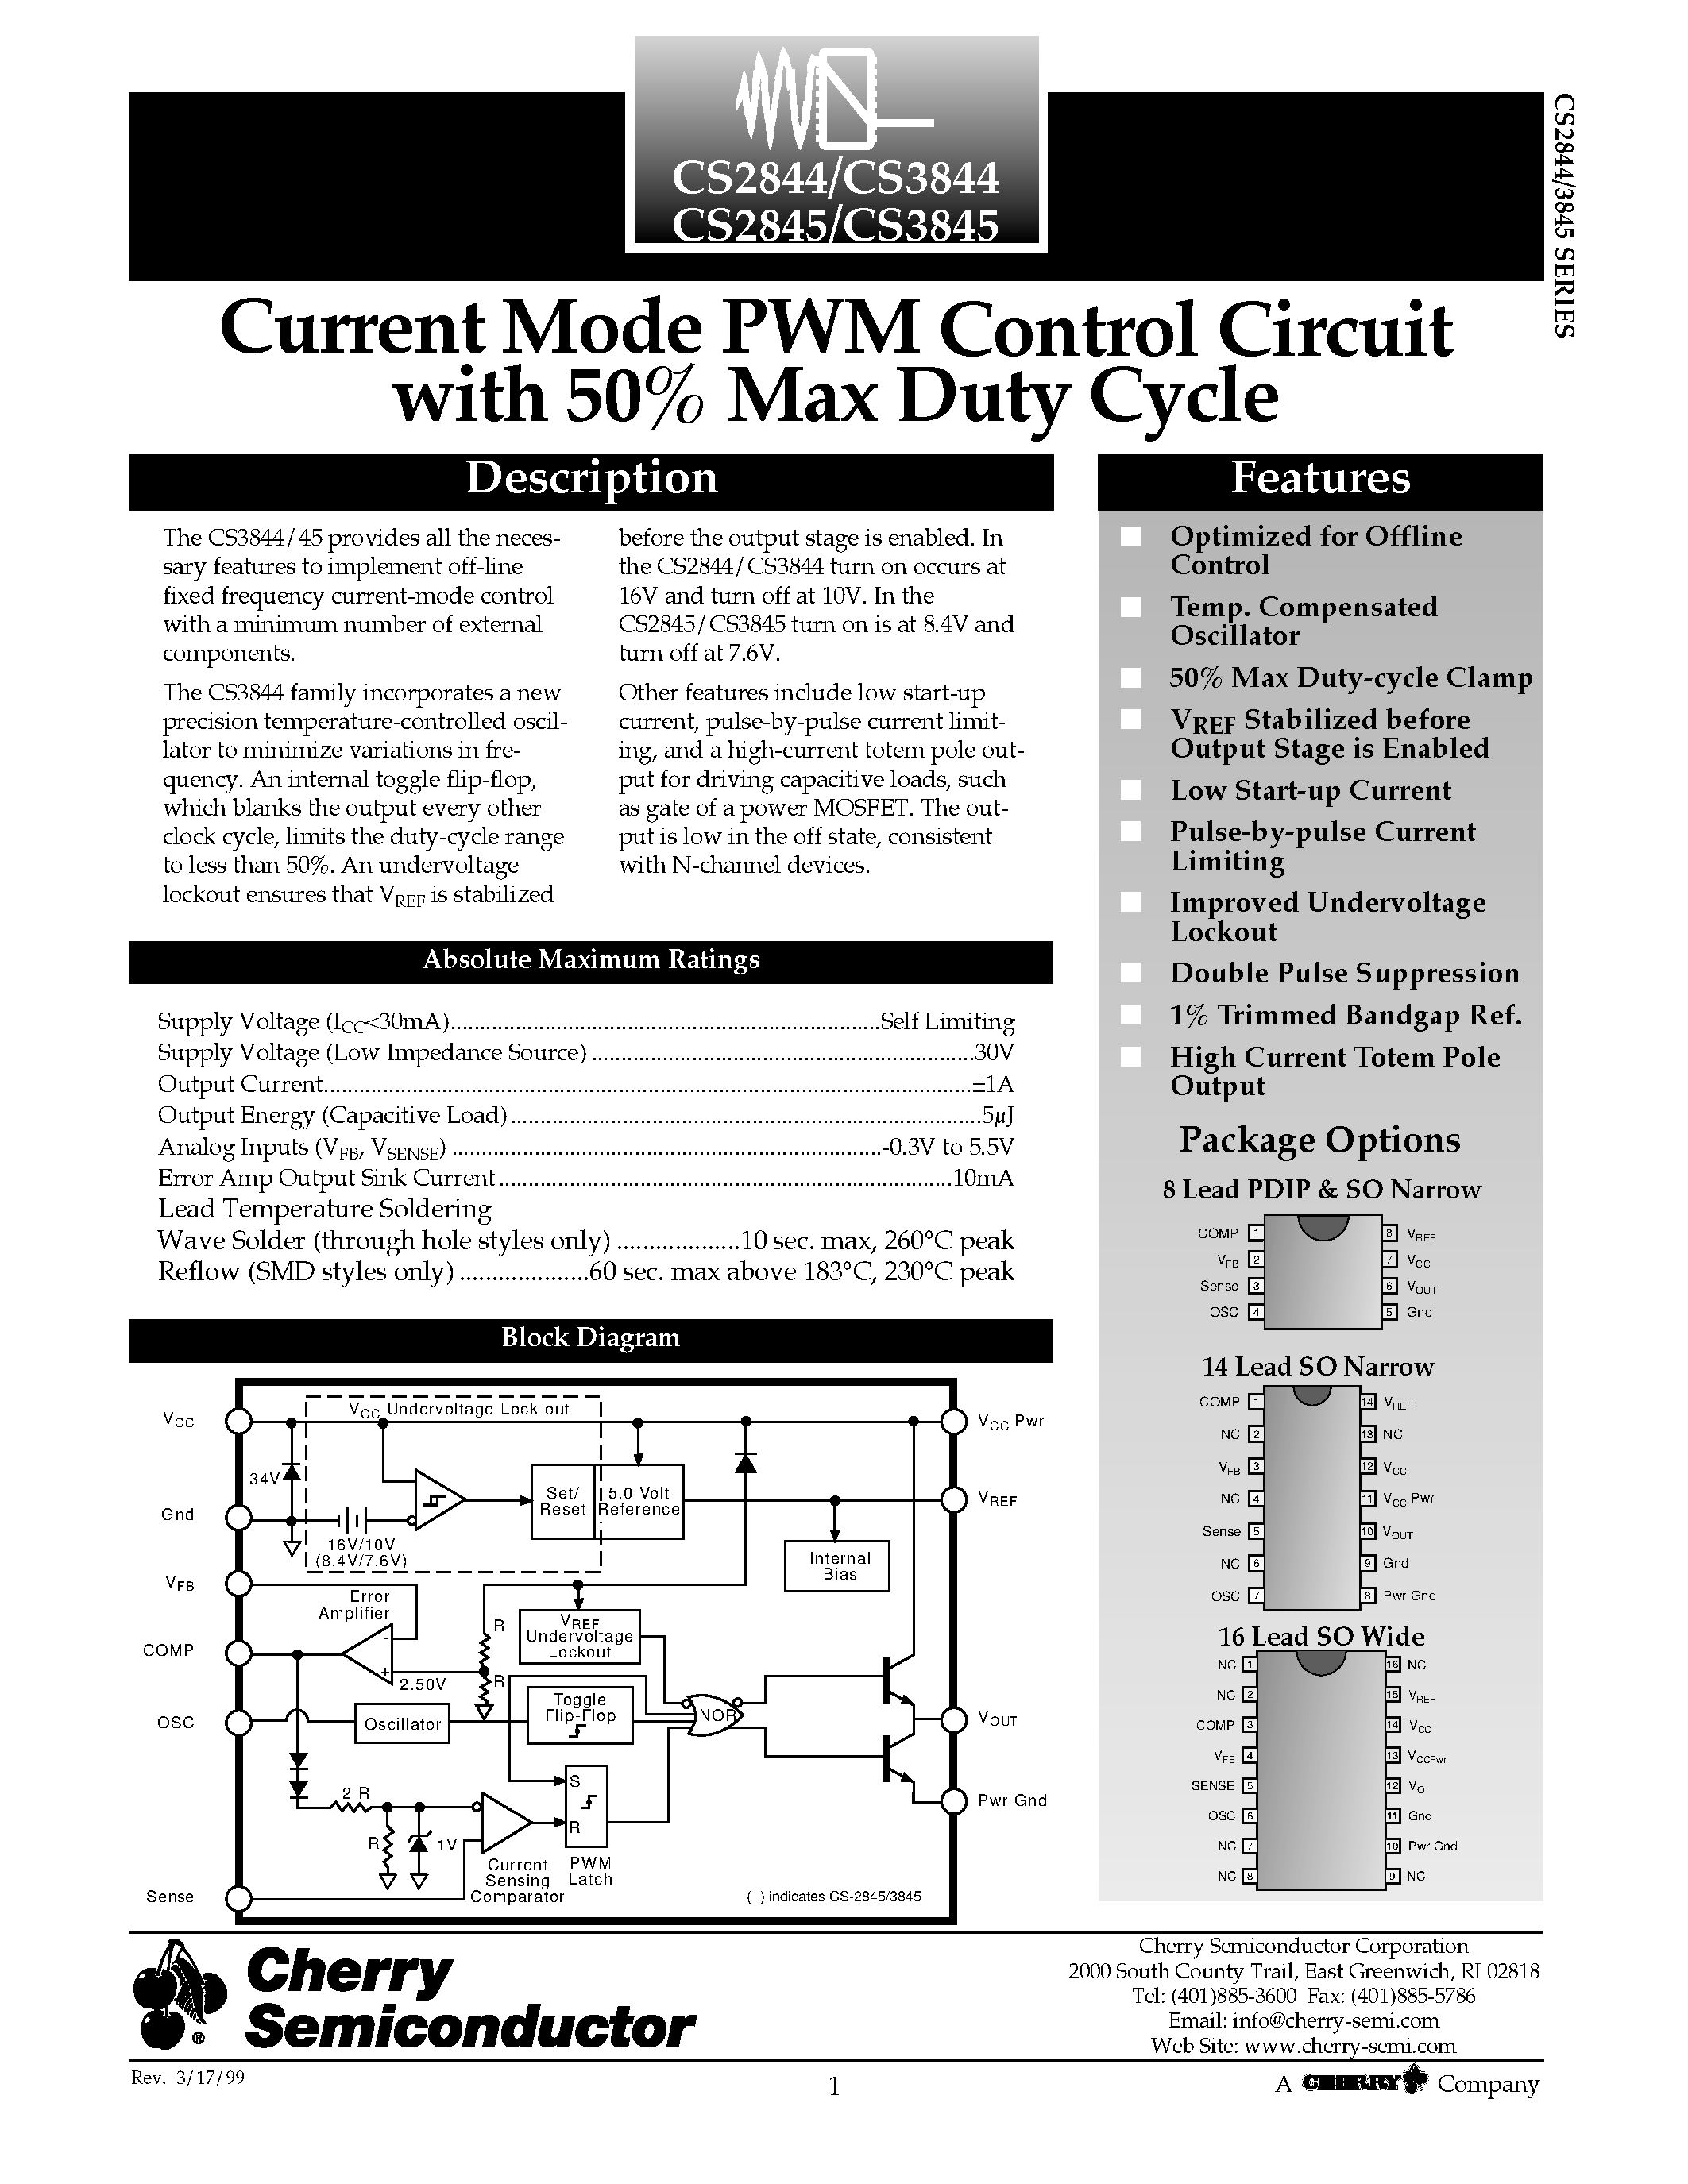 Datasheet CS2844LN8 - Current Mode PWM Control Circuit with 50% Max Duty Cycle page 1